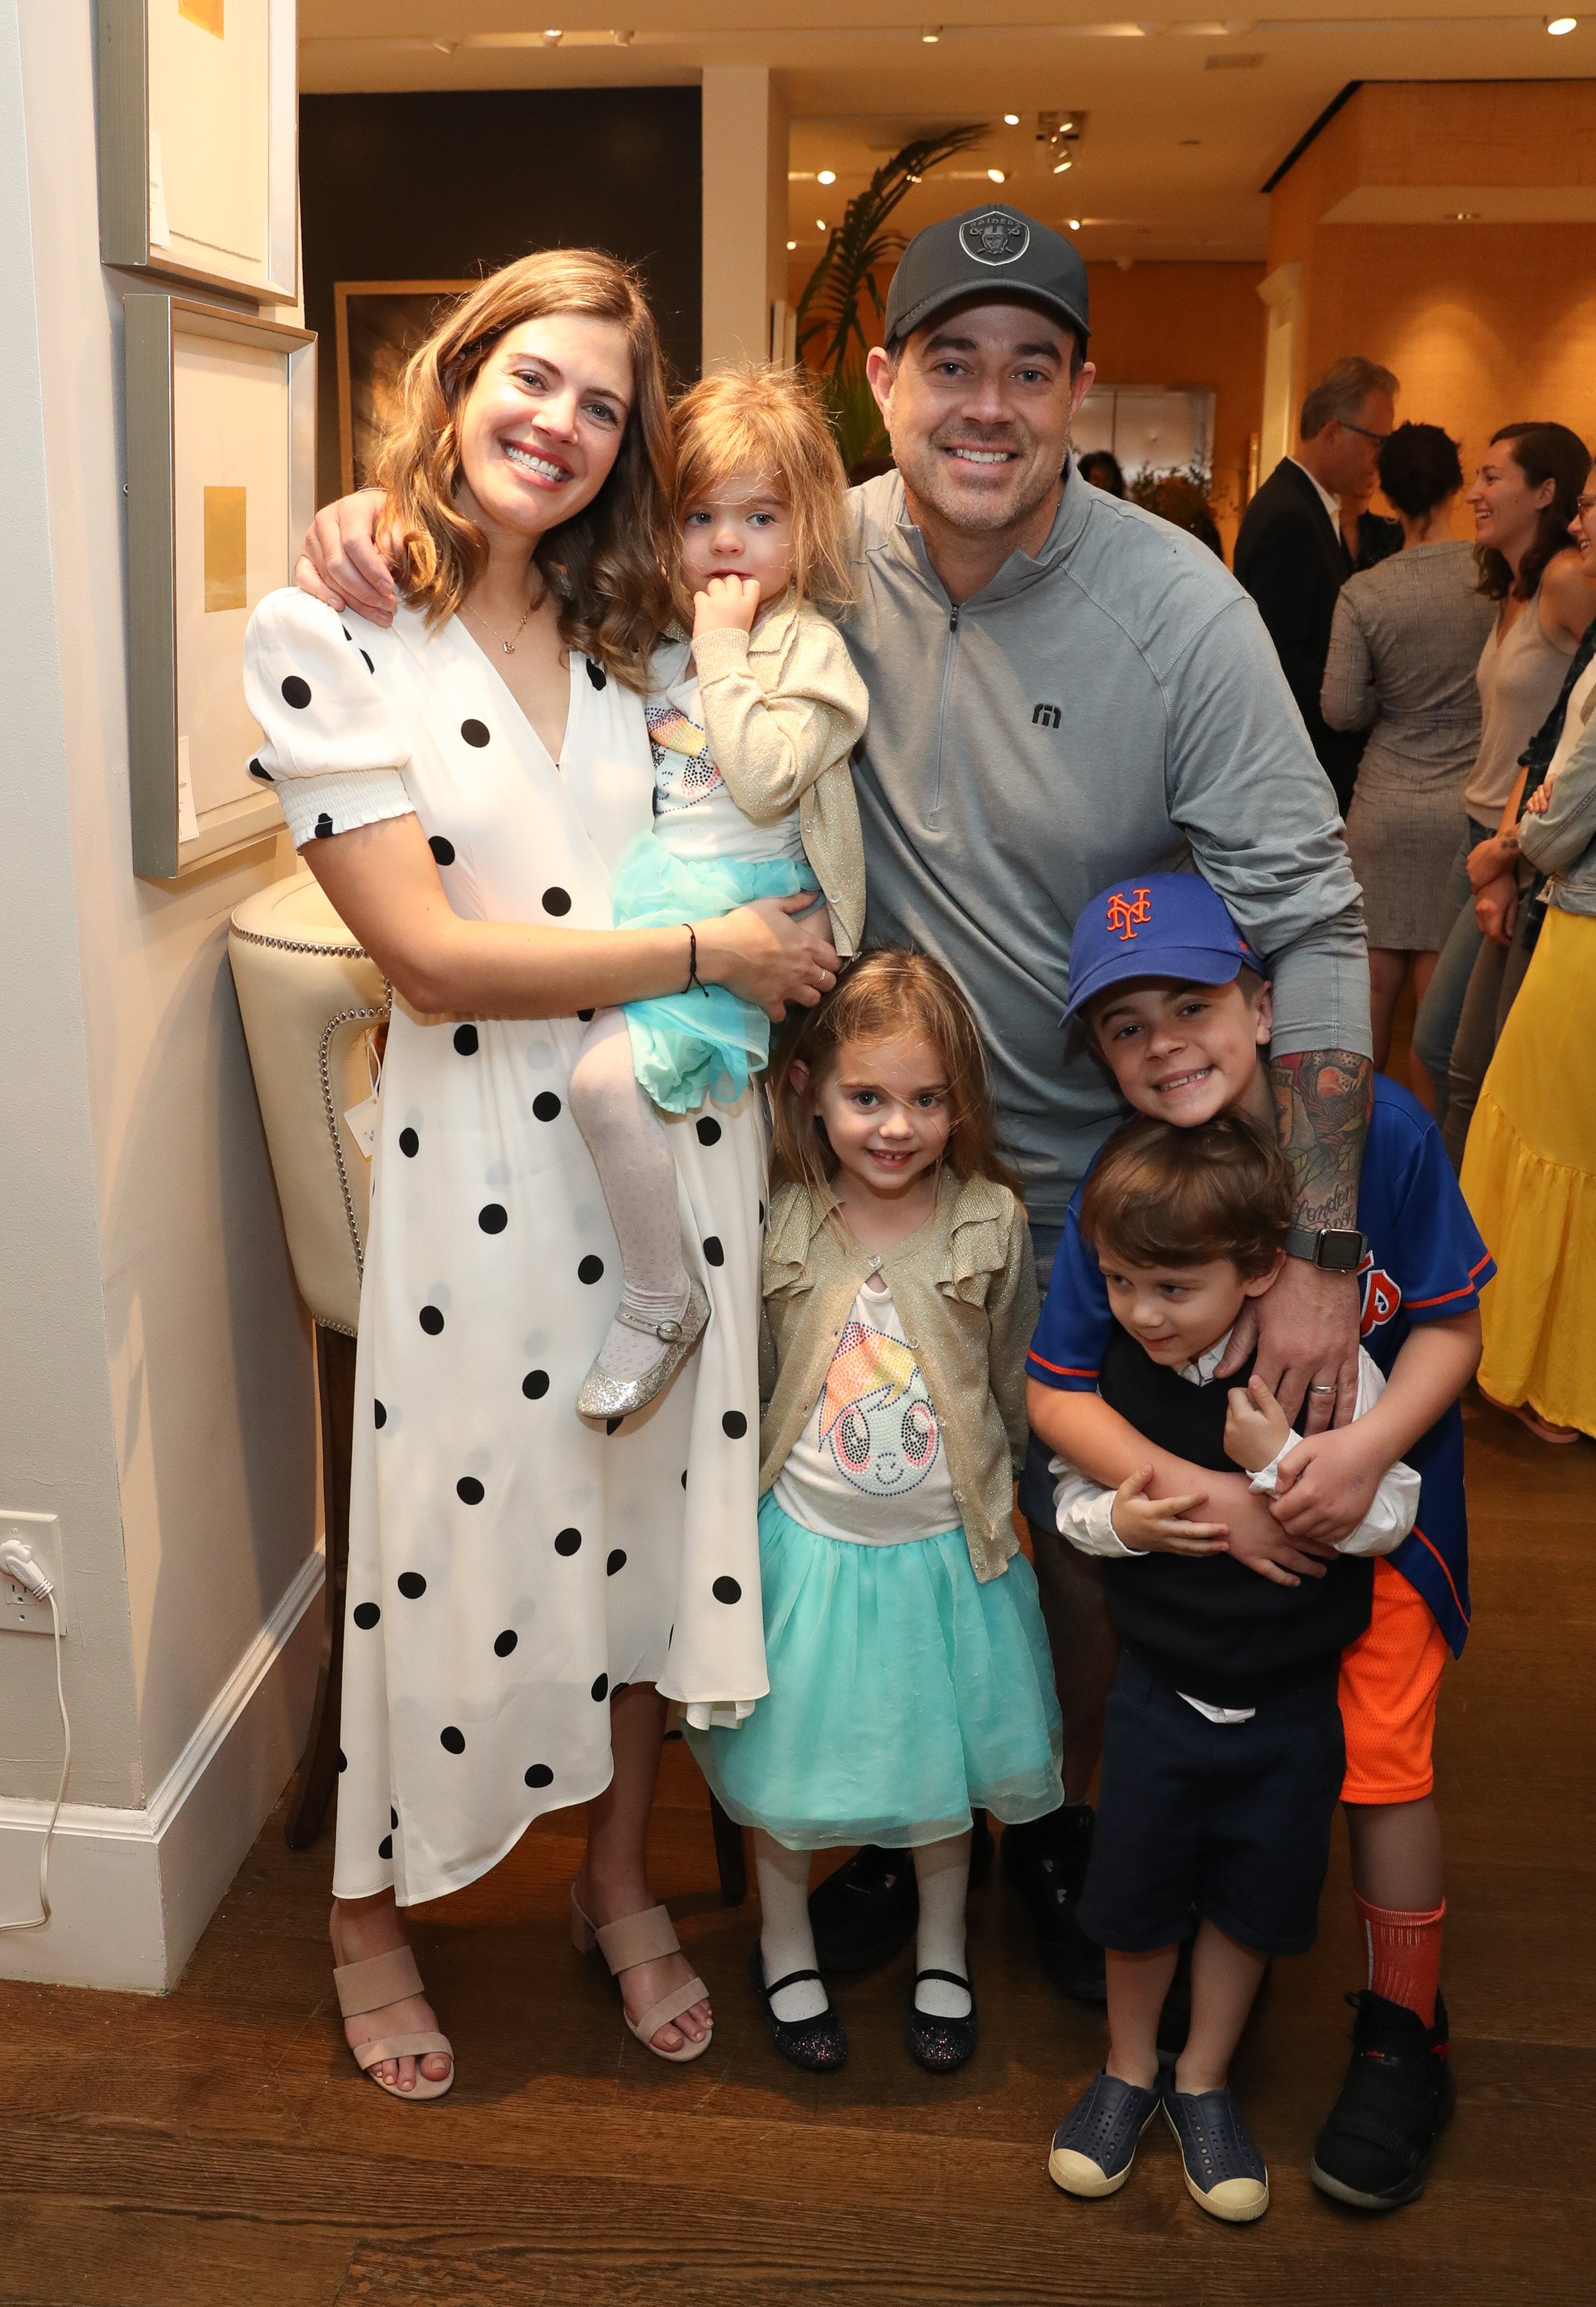 Siri Daly (L) and Carson Daly, and family, attend "Siriously Delicious" by Siri Daly book launch event at Williams Sonoma Columbus Circle on April 14, 2018, in New York City. | Source: Getty Images.